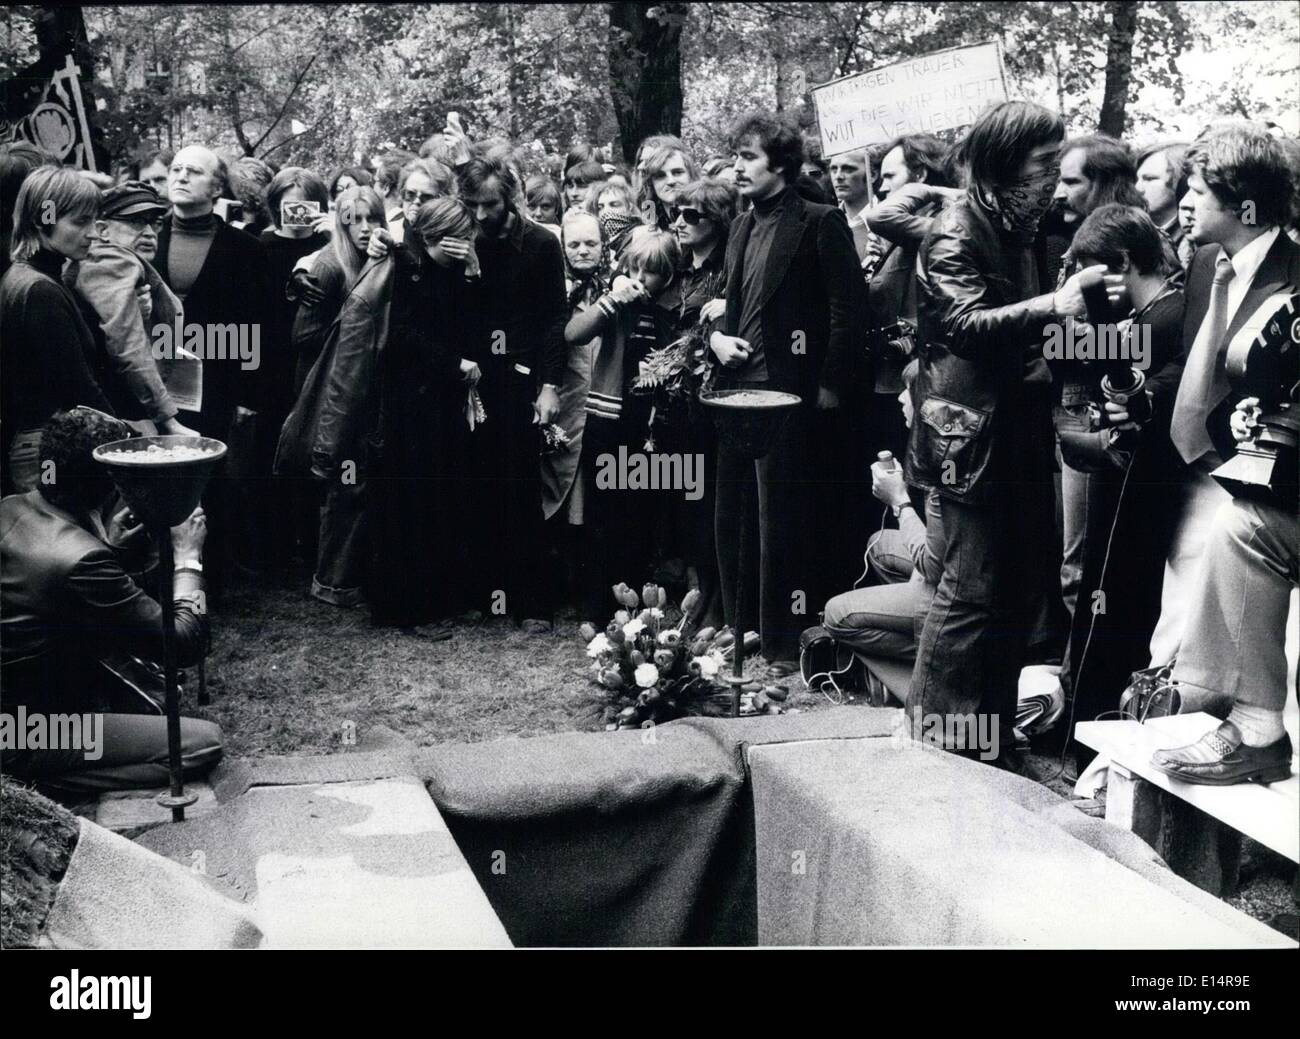 Apr. 18, 2012 - Anarchist Ulrike Meinhof buried in Berlin: Ulrike Meinhof (Ulrike Meinhof), leading member of the German anarchist ''Baader/Meinhof'' group, who committed suicide by hanging herself with a towel in her cell of the Stuttgart-Stammheim prison on May 9th, 1976 was buried in Berlin on May 15th. About 4000 people accompanied her on her last journey. After the funeral there took place a demonstration by 45000 persons through the streets of Berlin. Photo shows the funeral of Ulrike Meinhof at the Holy Trinity Cemetery in Berlin. In the left the step-daughter of Ulrike Meinhof, 3 Stock Photo